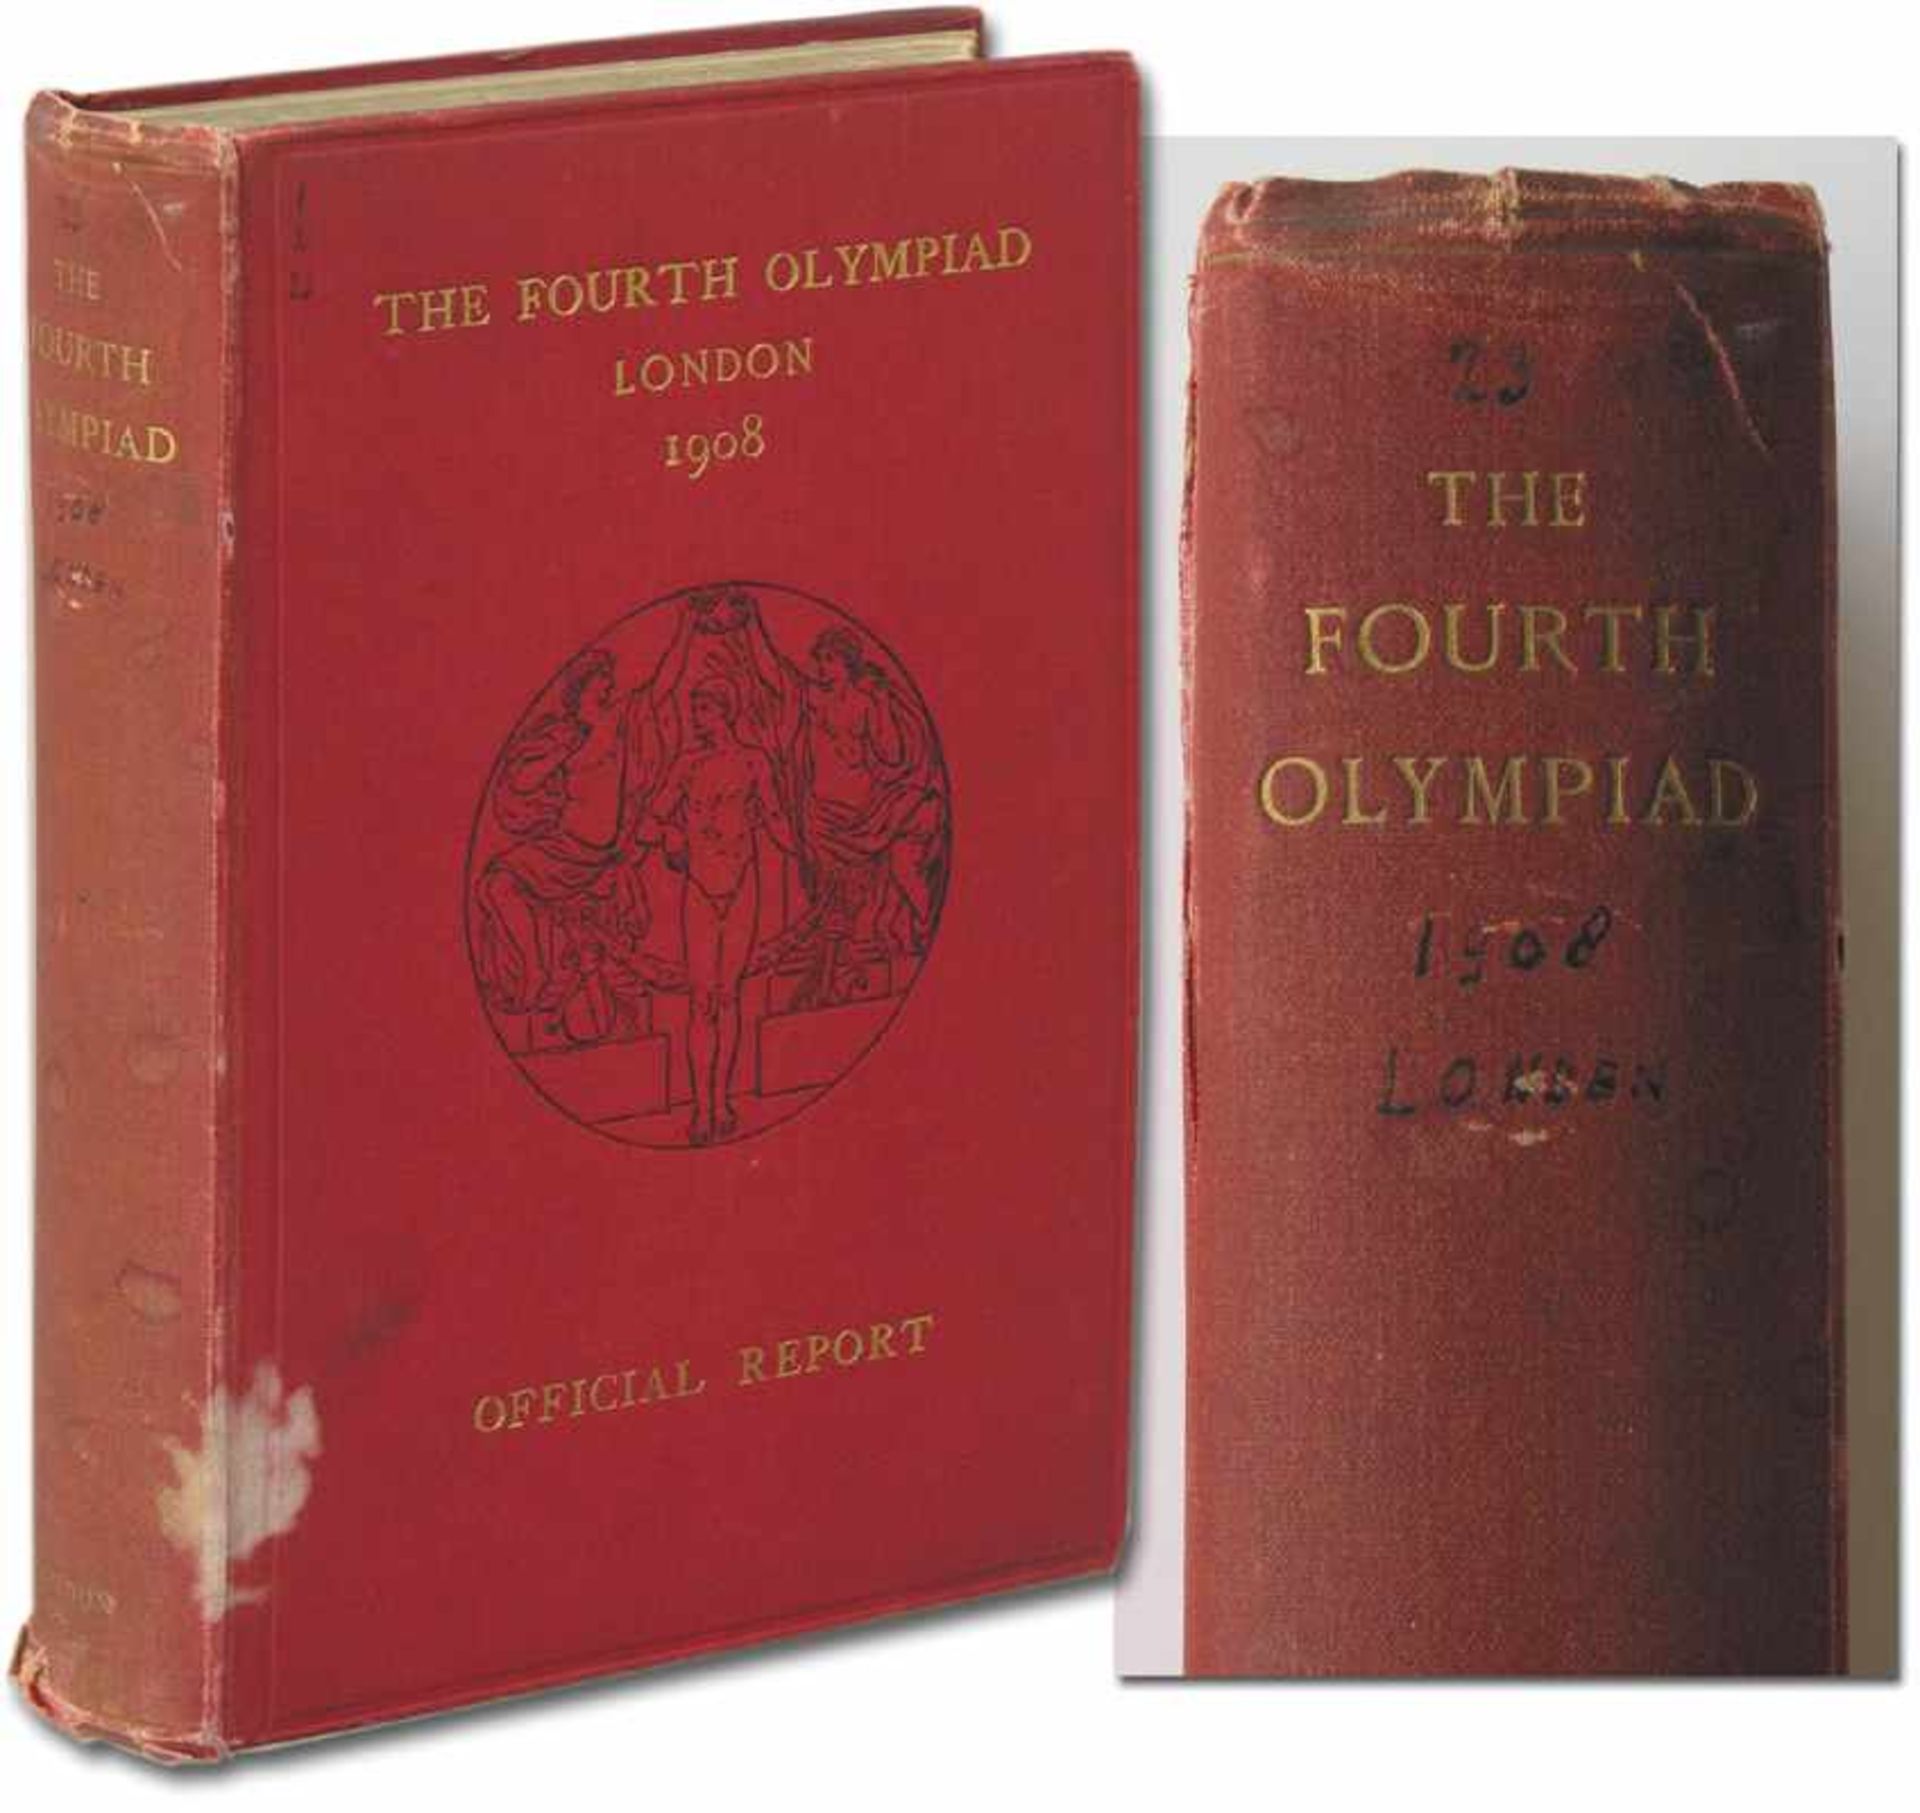 Olympic Games 1908. Official Report London 1908 - IV Olympiad London 1908, the official report